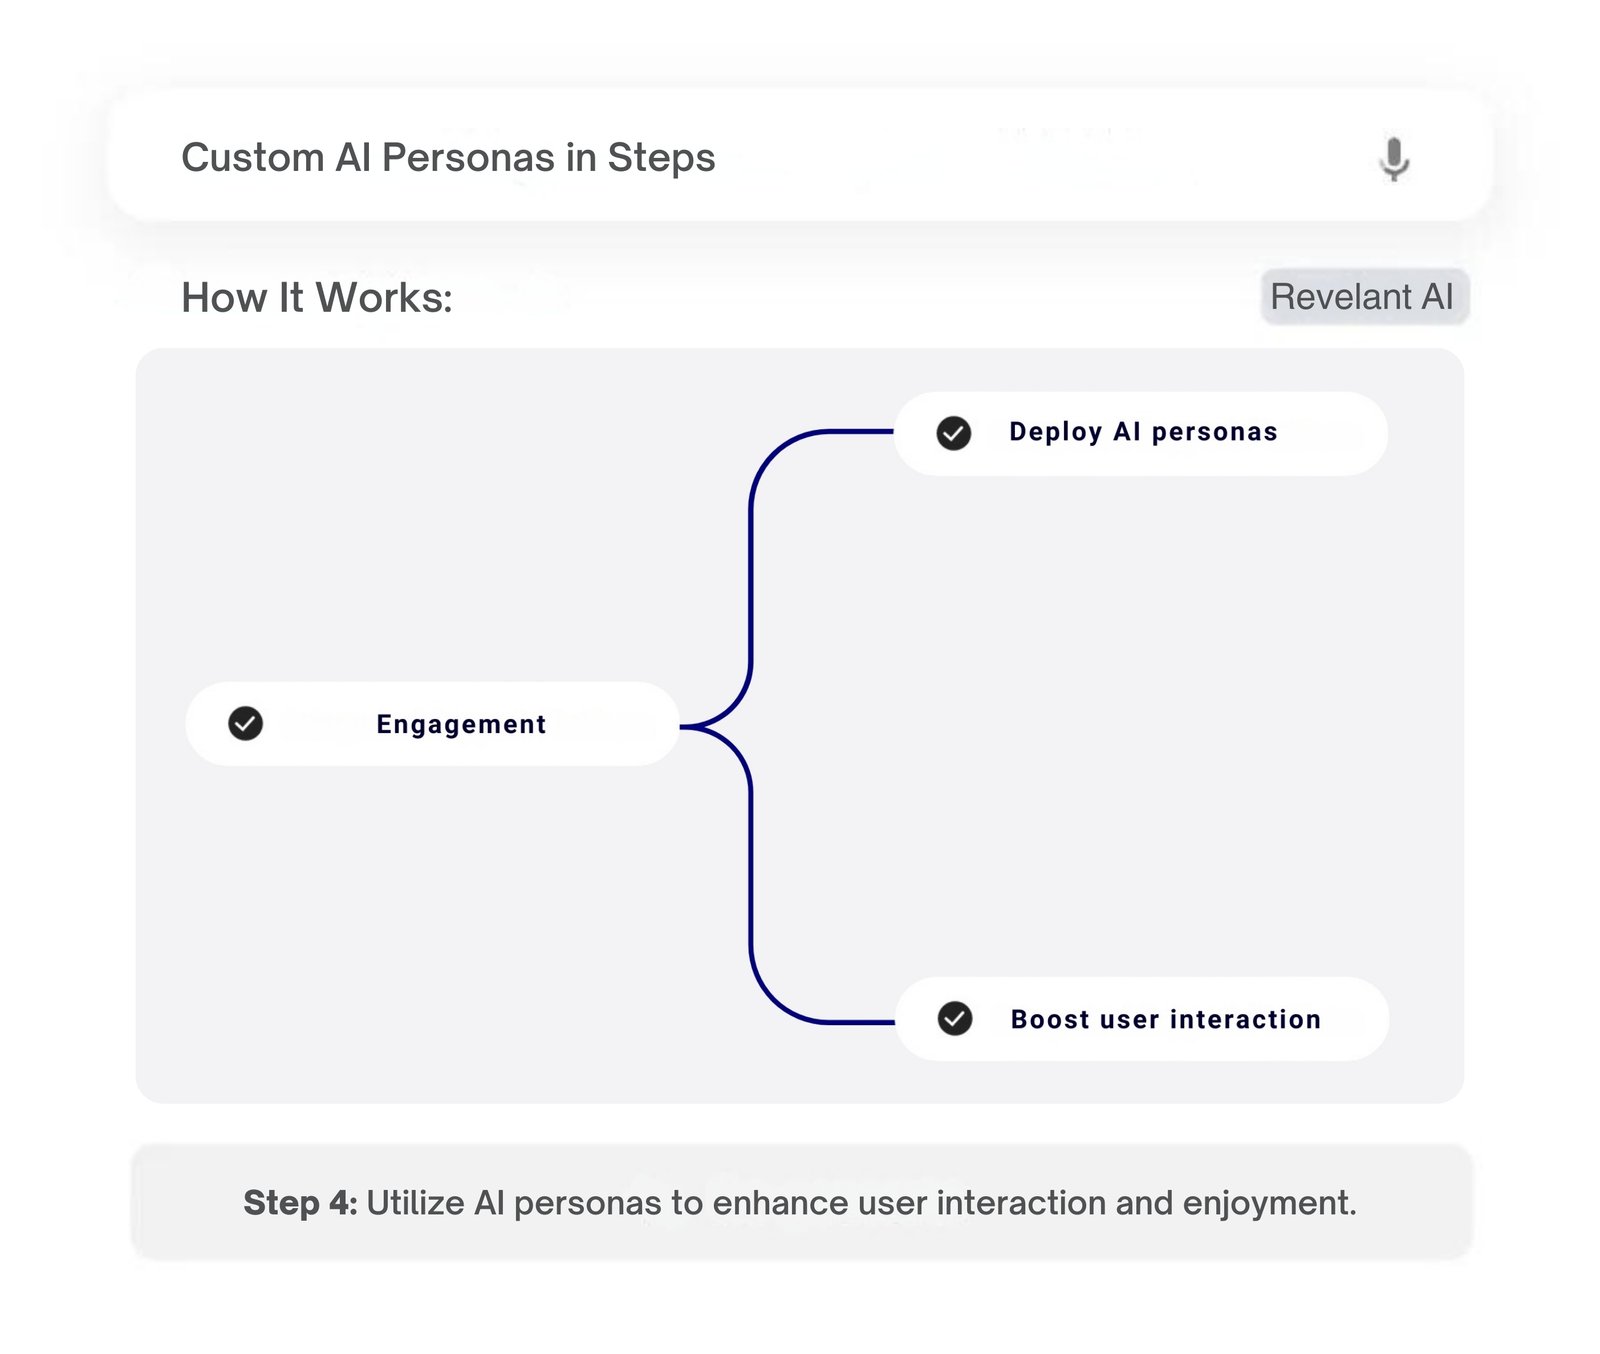 Illustration of step 4 in Revelant AI's custom AI personas setup, detailing the deployment of AI personas to boost user interaction